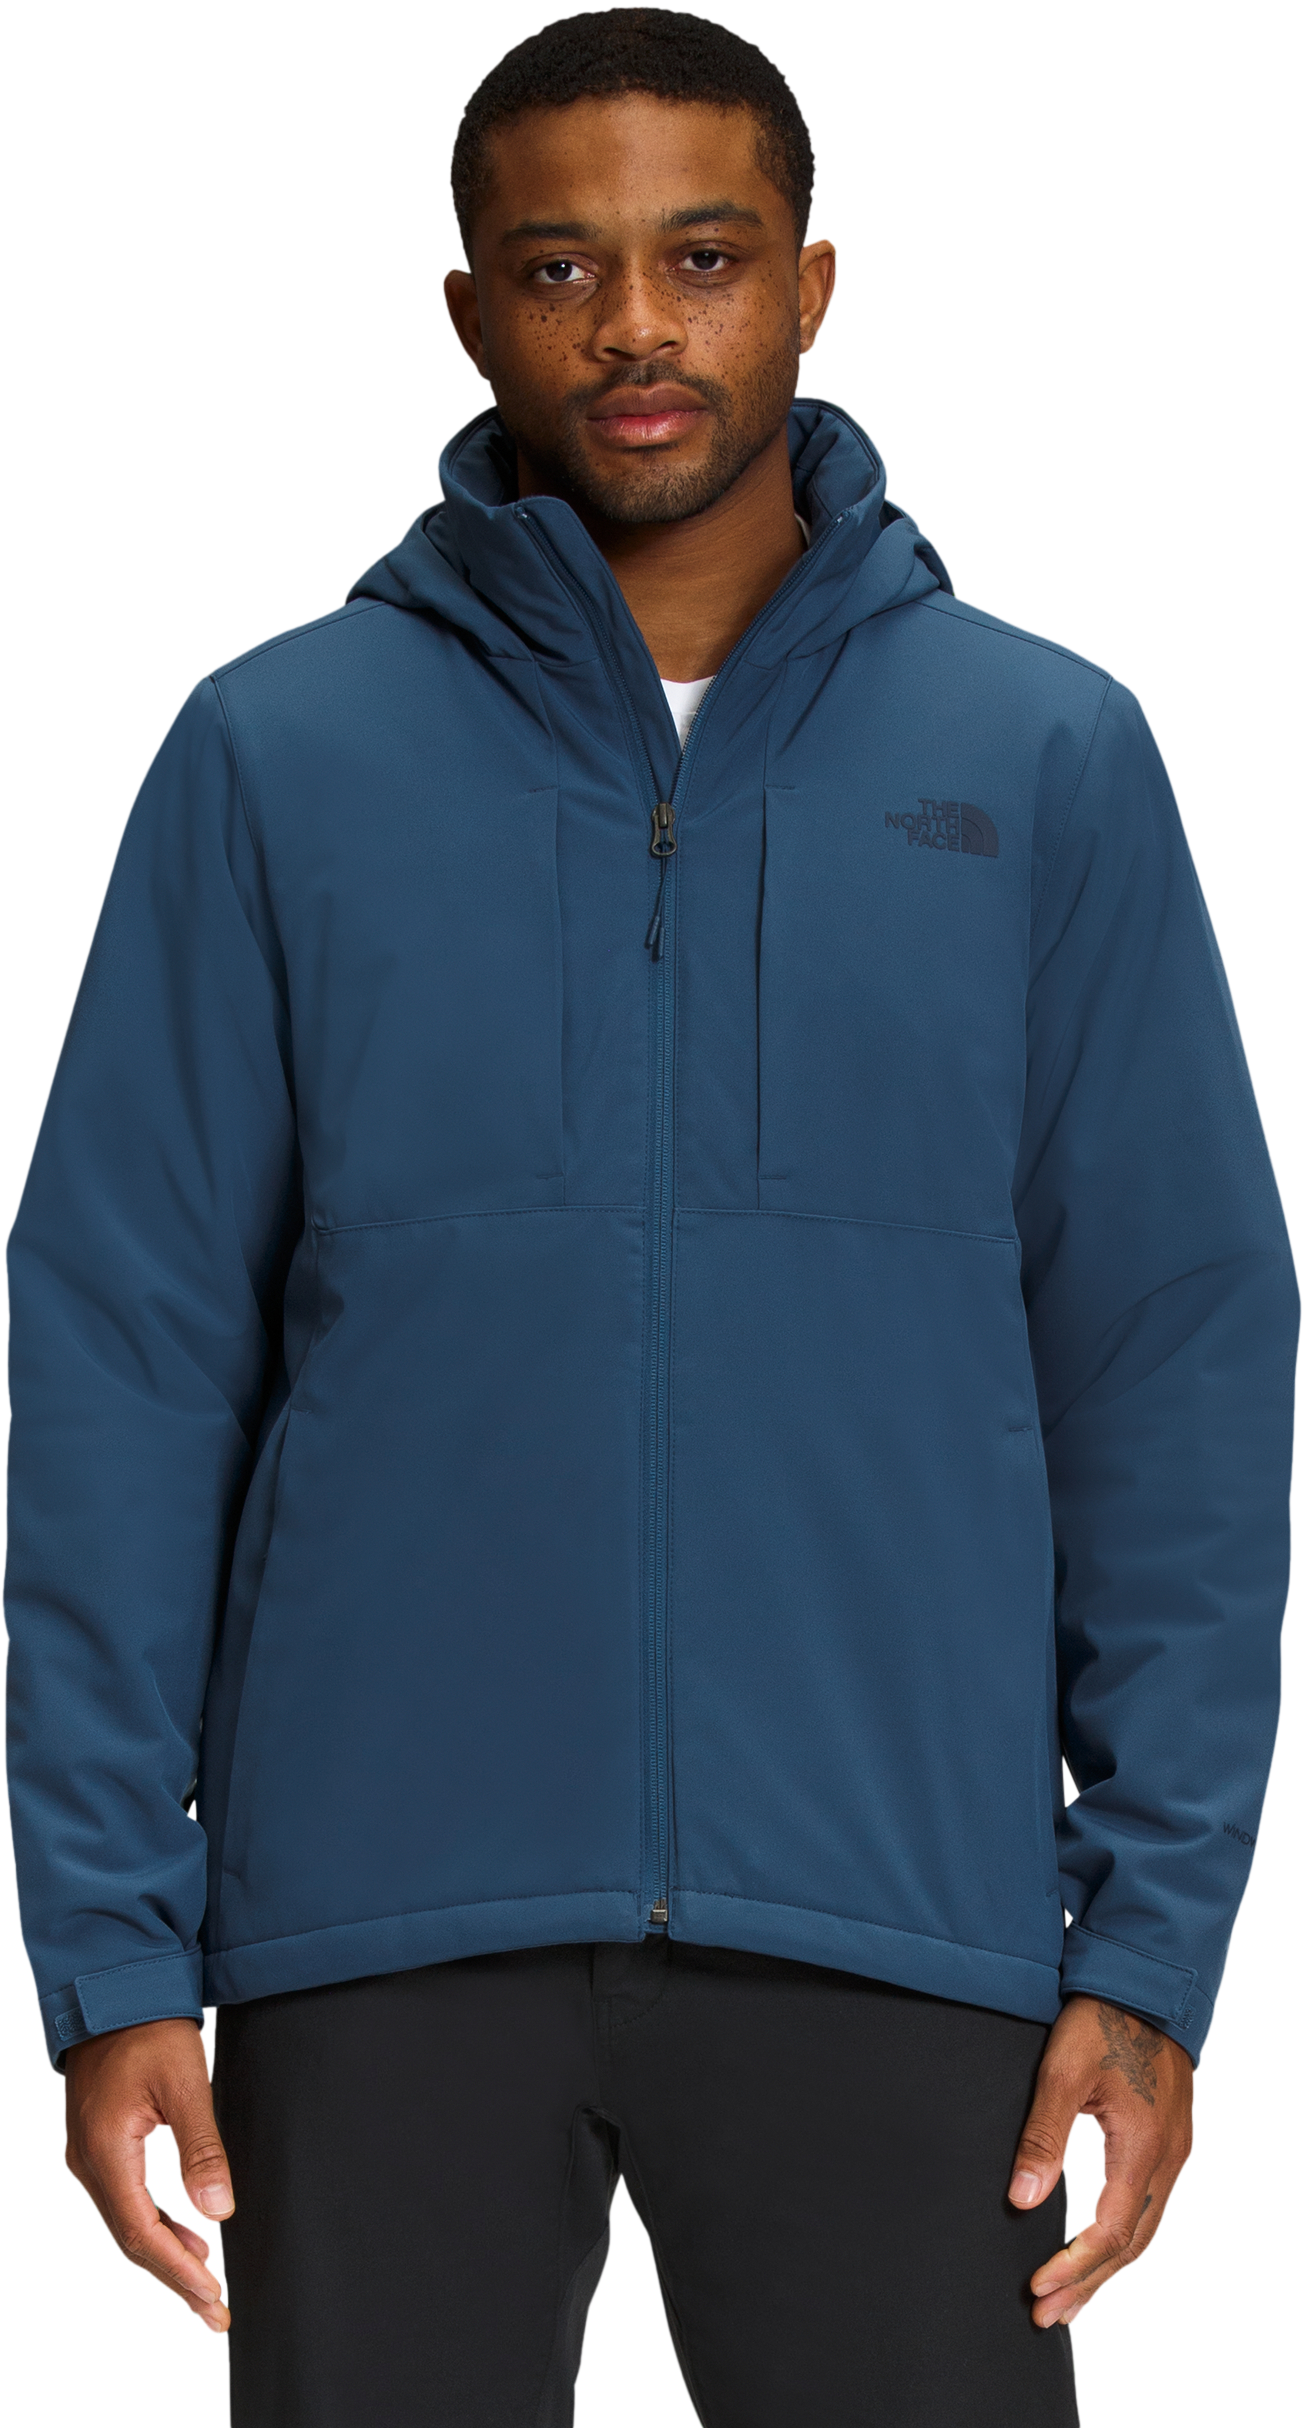 The North Face Apex Elevation Hooded Jacket for Men - Shady Blue - S